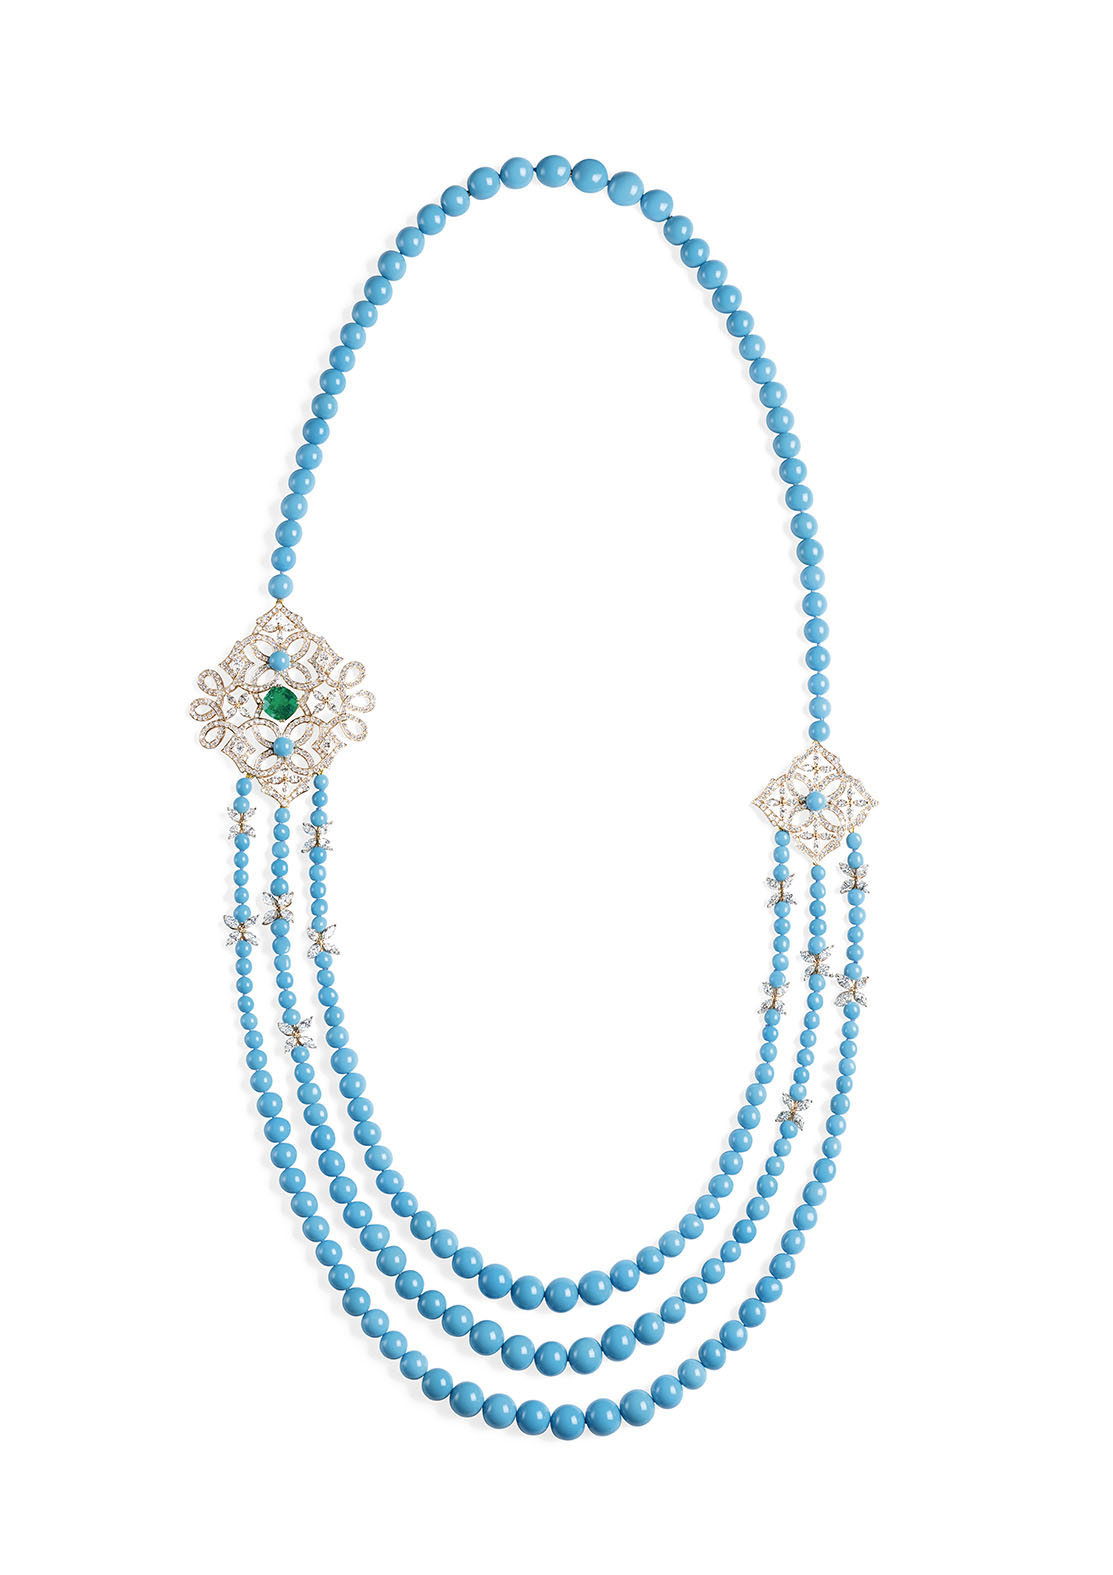 Jewelry News Network: Piaget Launches ‘Secrets & Lights – A Mythical ...